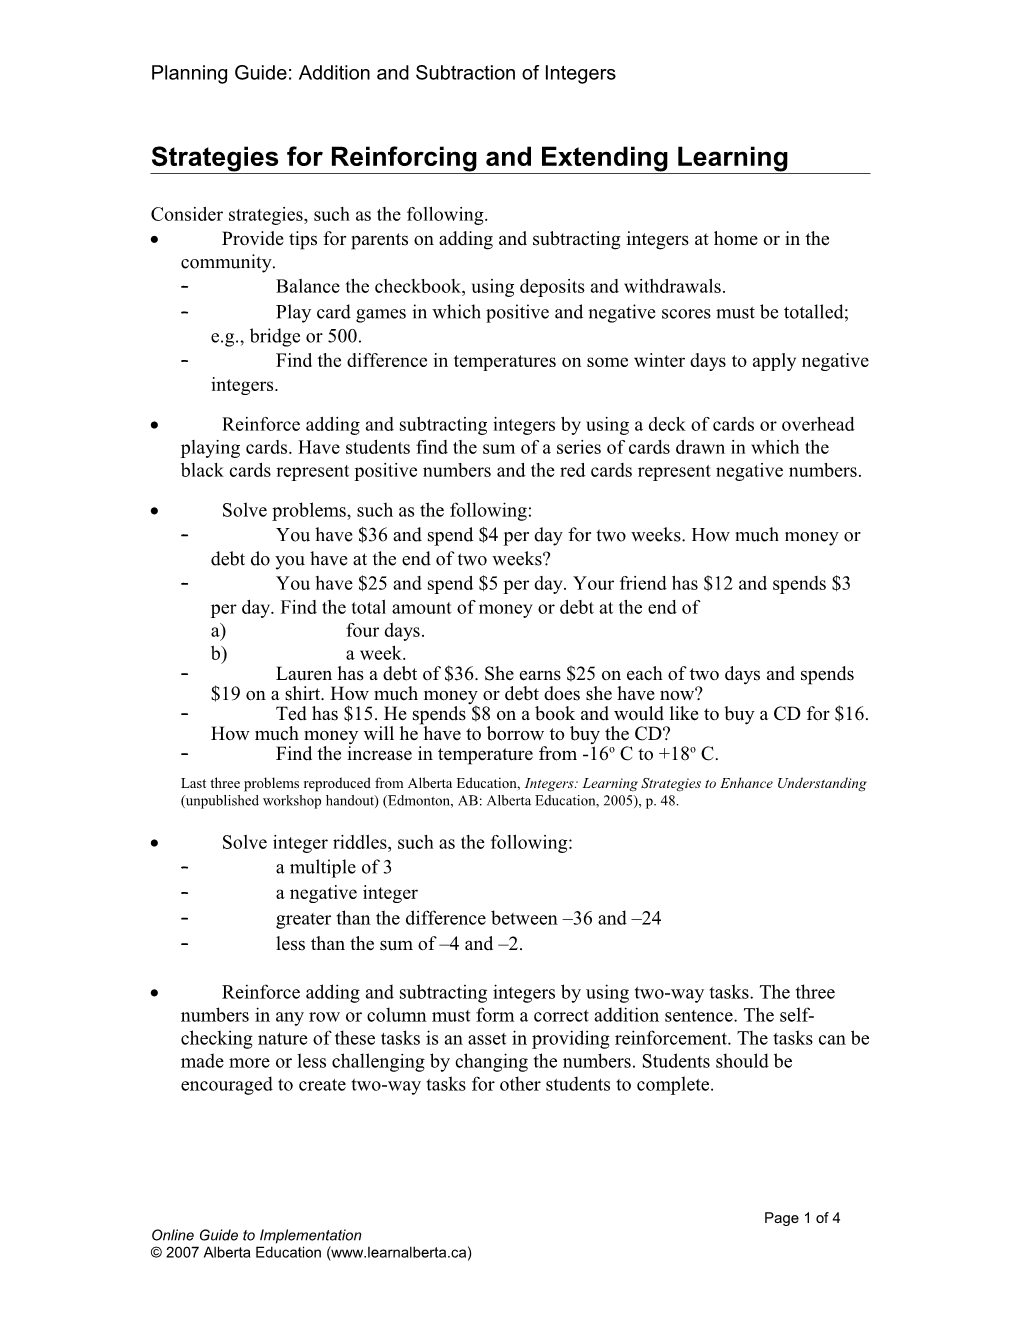 Strategies for Reinforcing and Extending Learning